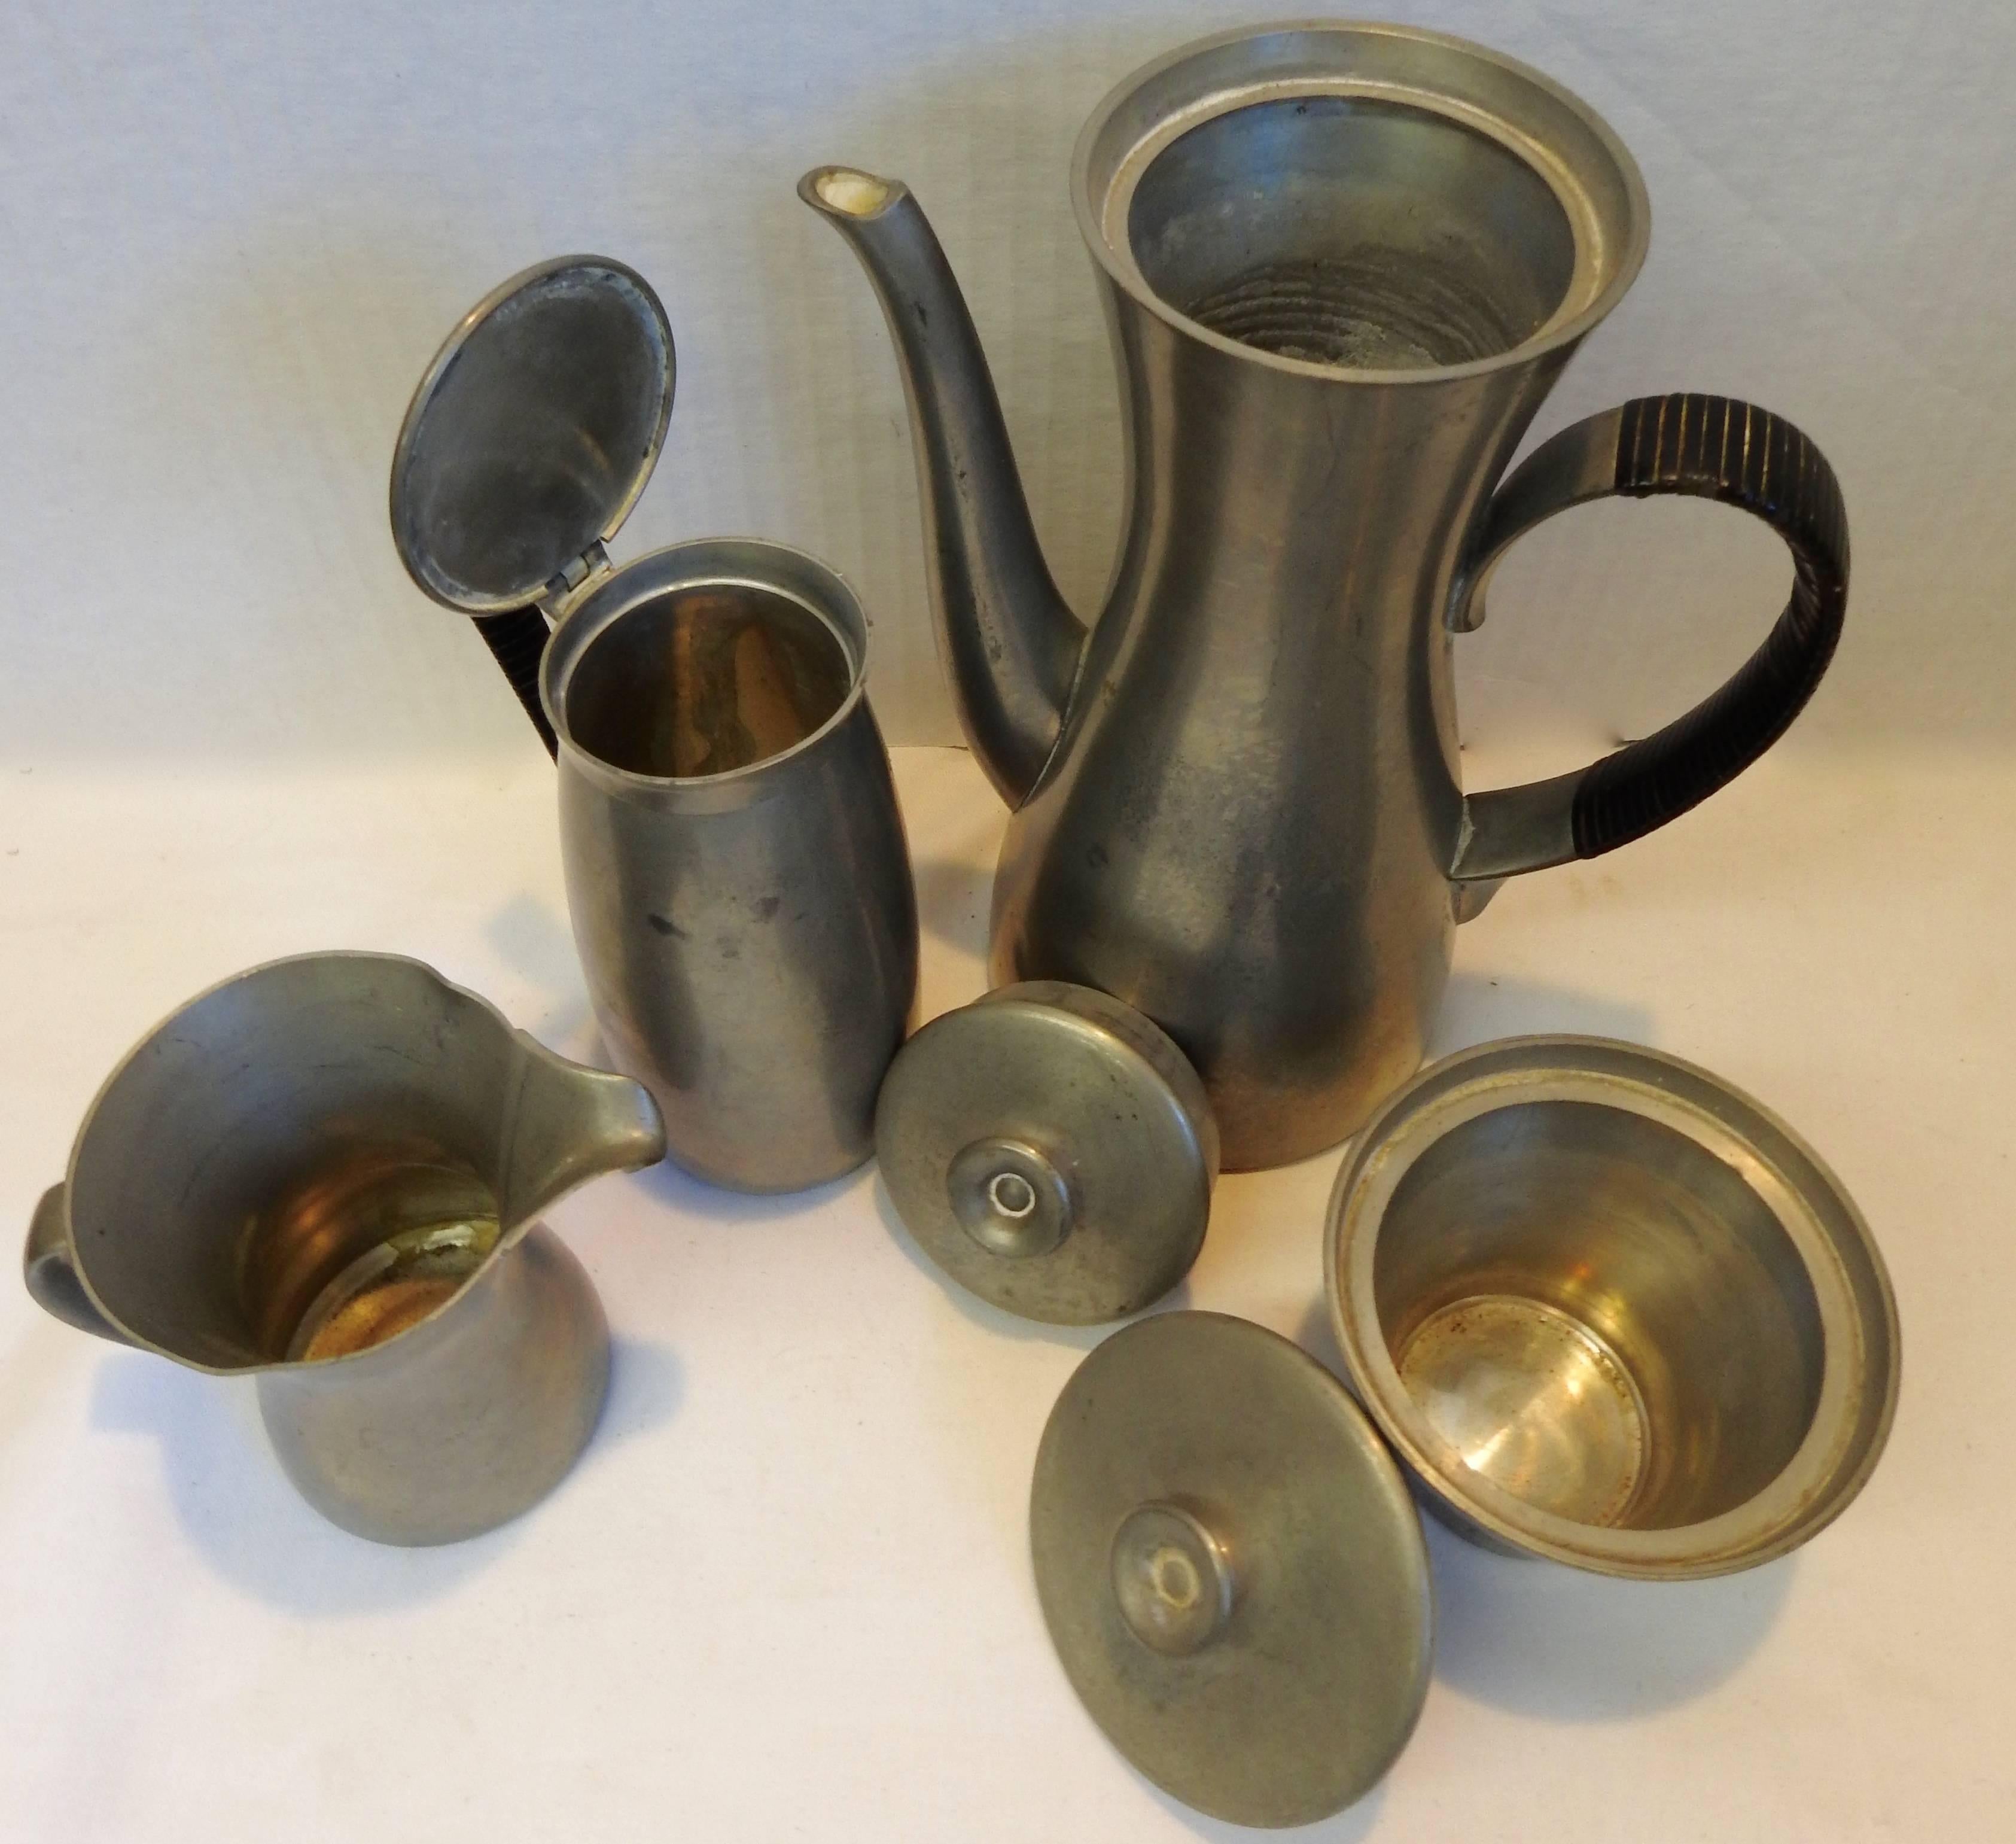 Royal Holland manufactured this midcentury tea or coffee set. It consists of a coffee or tea pot along with a sugar and creamer and a container for your waste of tea leaves or grounds. The handles of the two larger containers are wrapped in a black